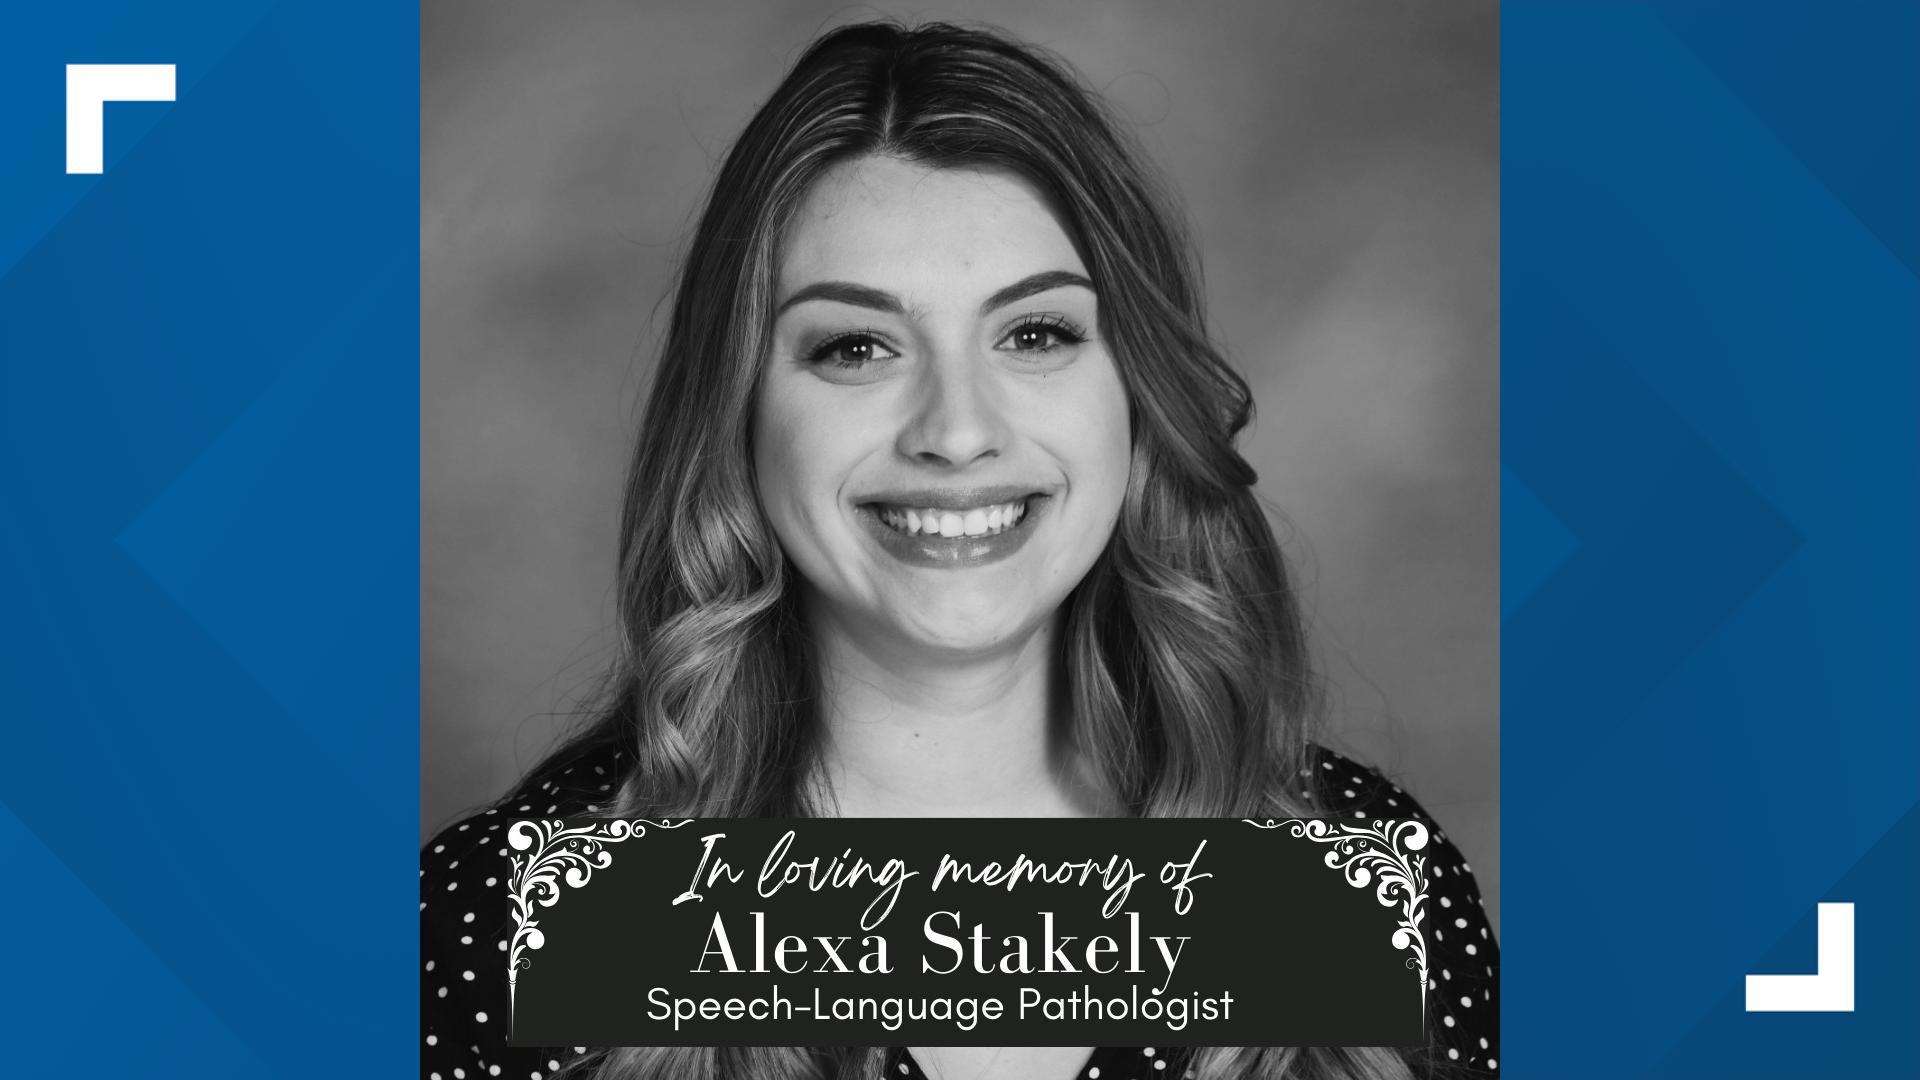 Alexa Stakely was a speech-language pathologist for Canal Winchester Schools.